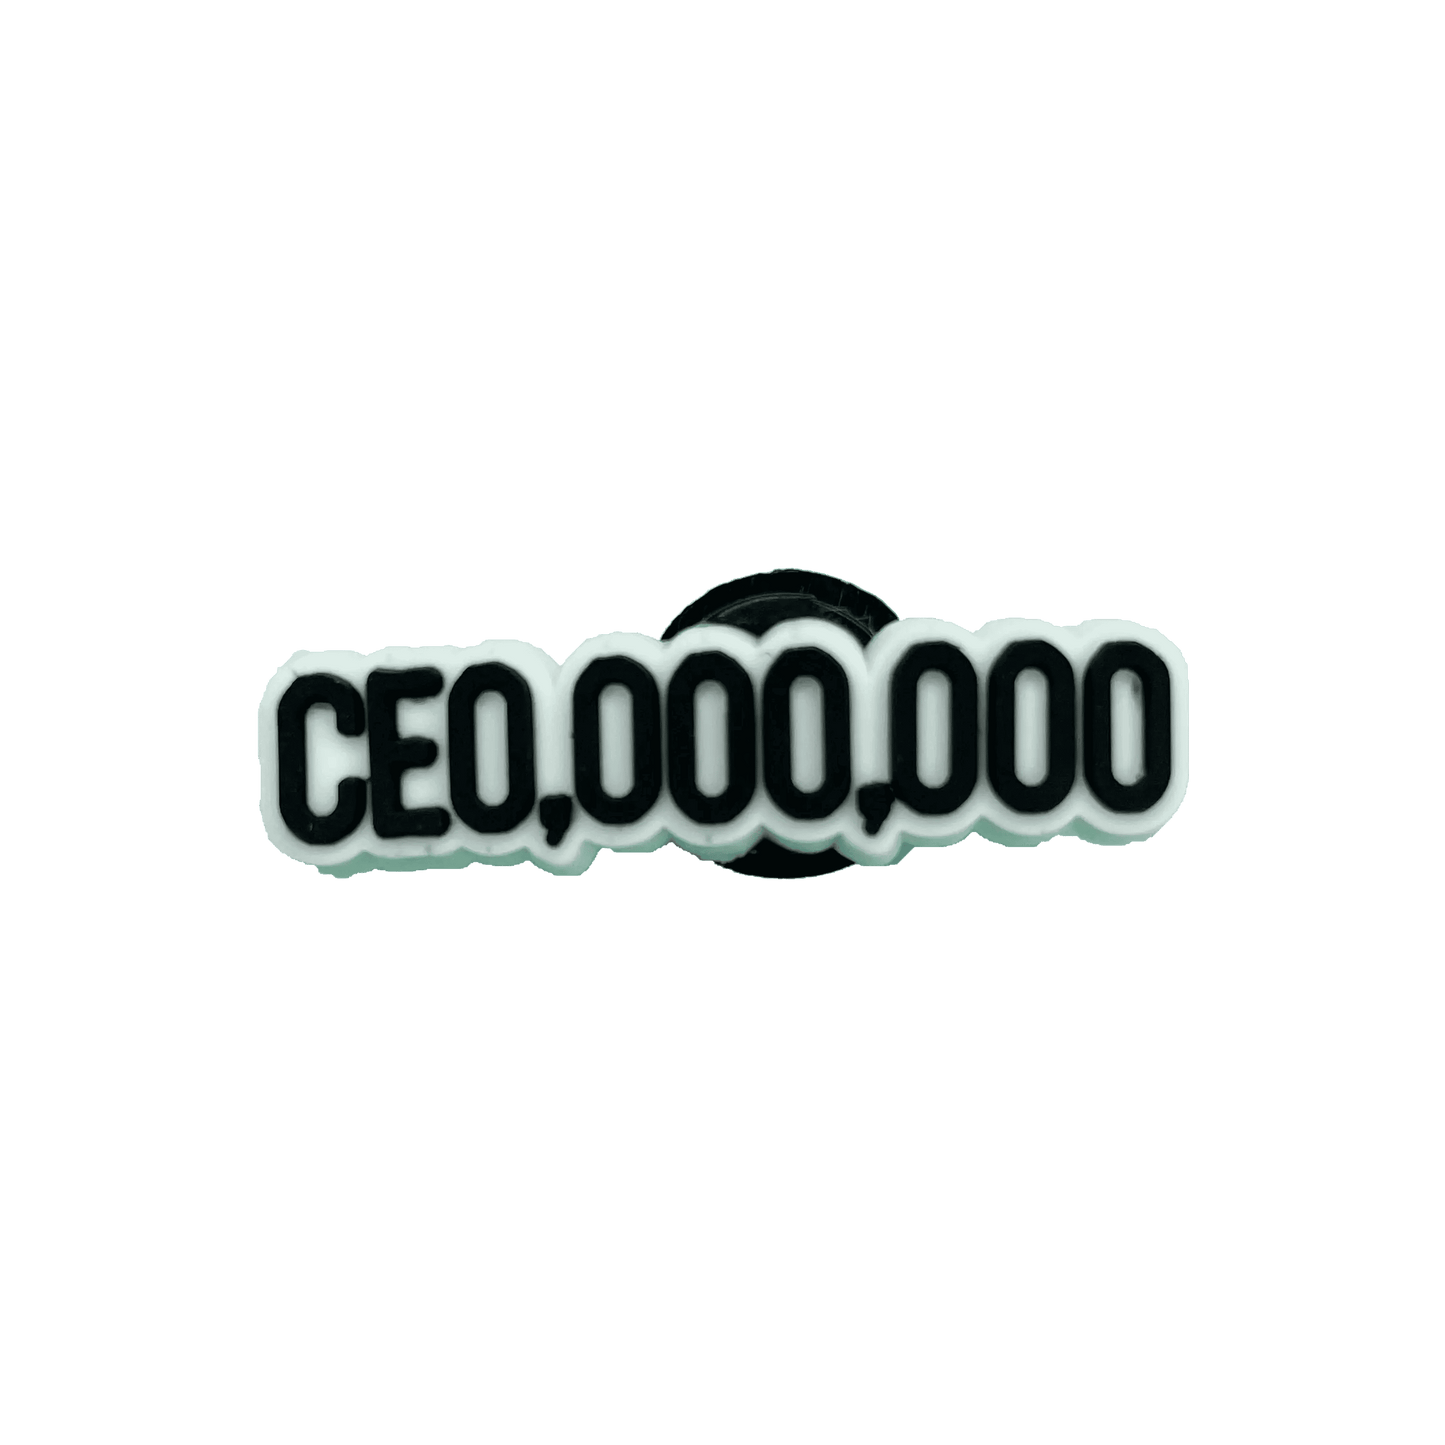 CEO,000,000 Charm Charms By Prince